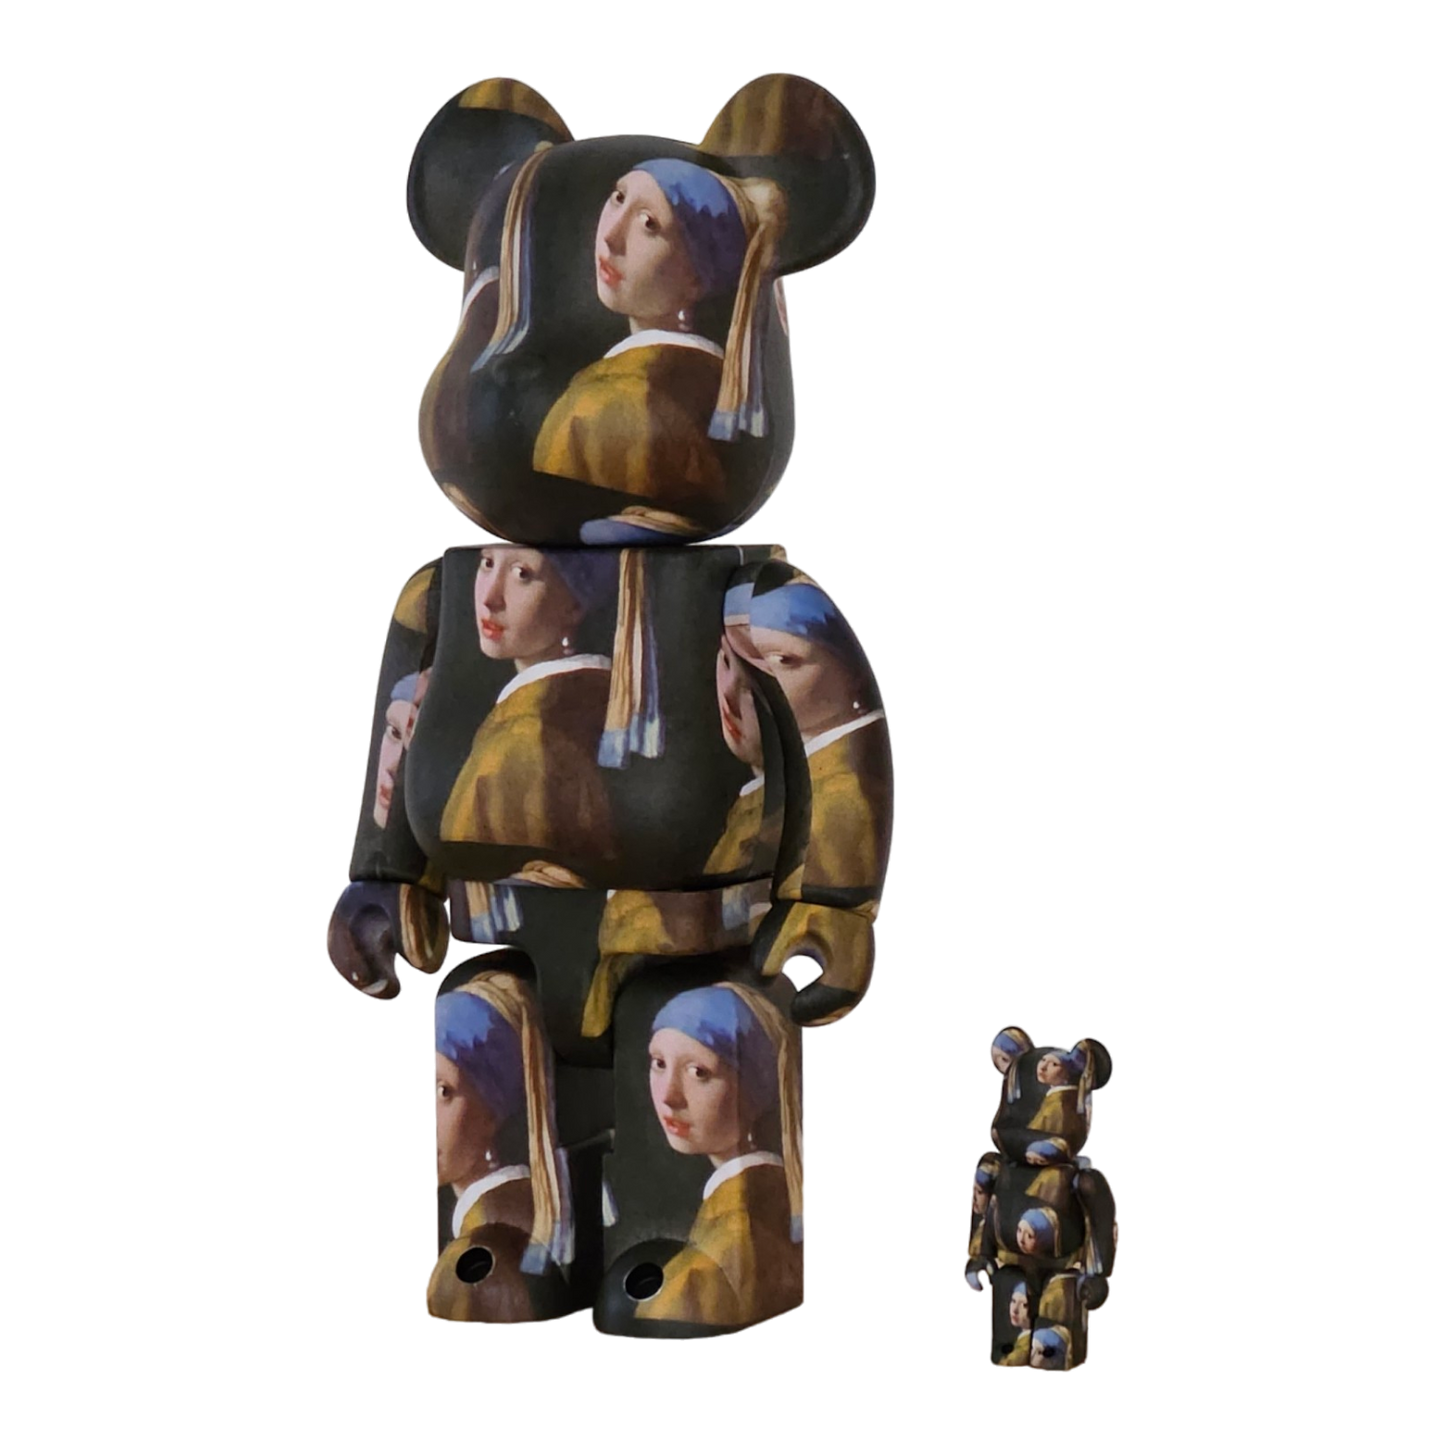 BE@RBRICK Johannes Vermeer "Girl with a Pearl Earring" (100%+400%)